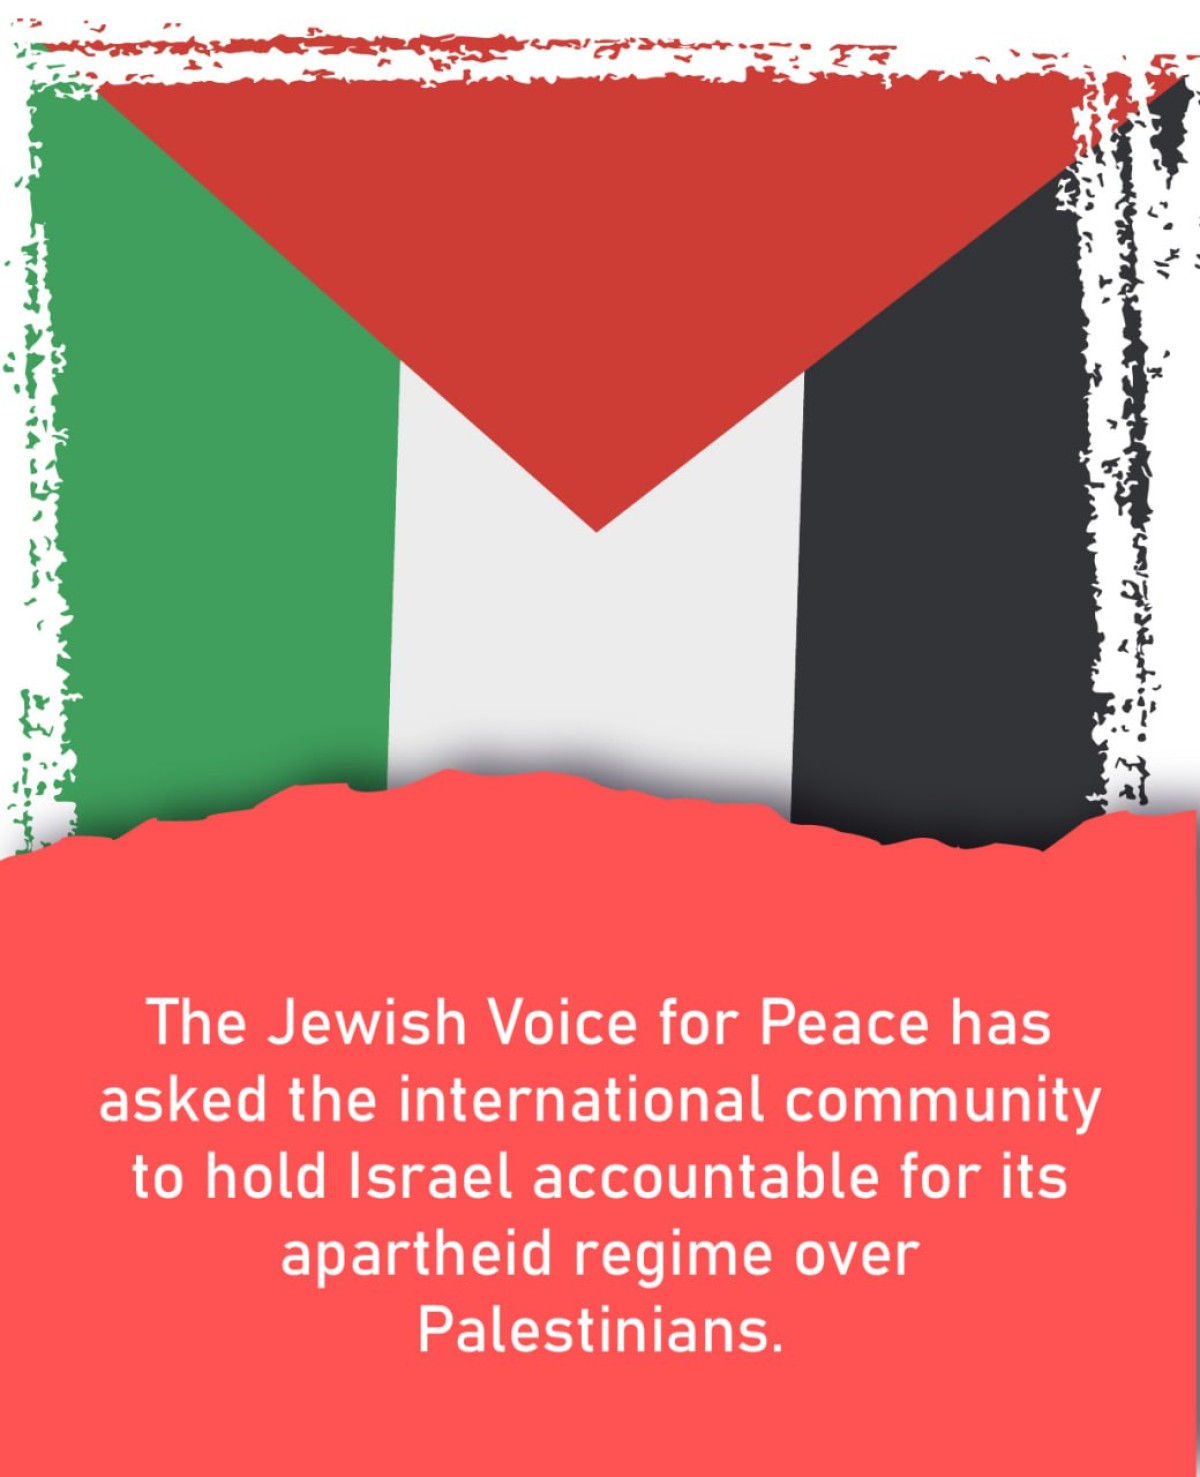 The Jewish Voice for Peace has asked the international community to hold Israel accountable for its apartheid regime over Palestinians.